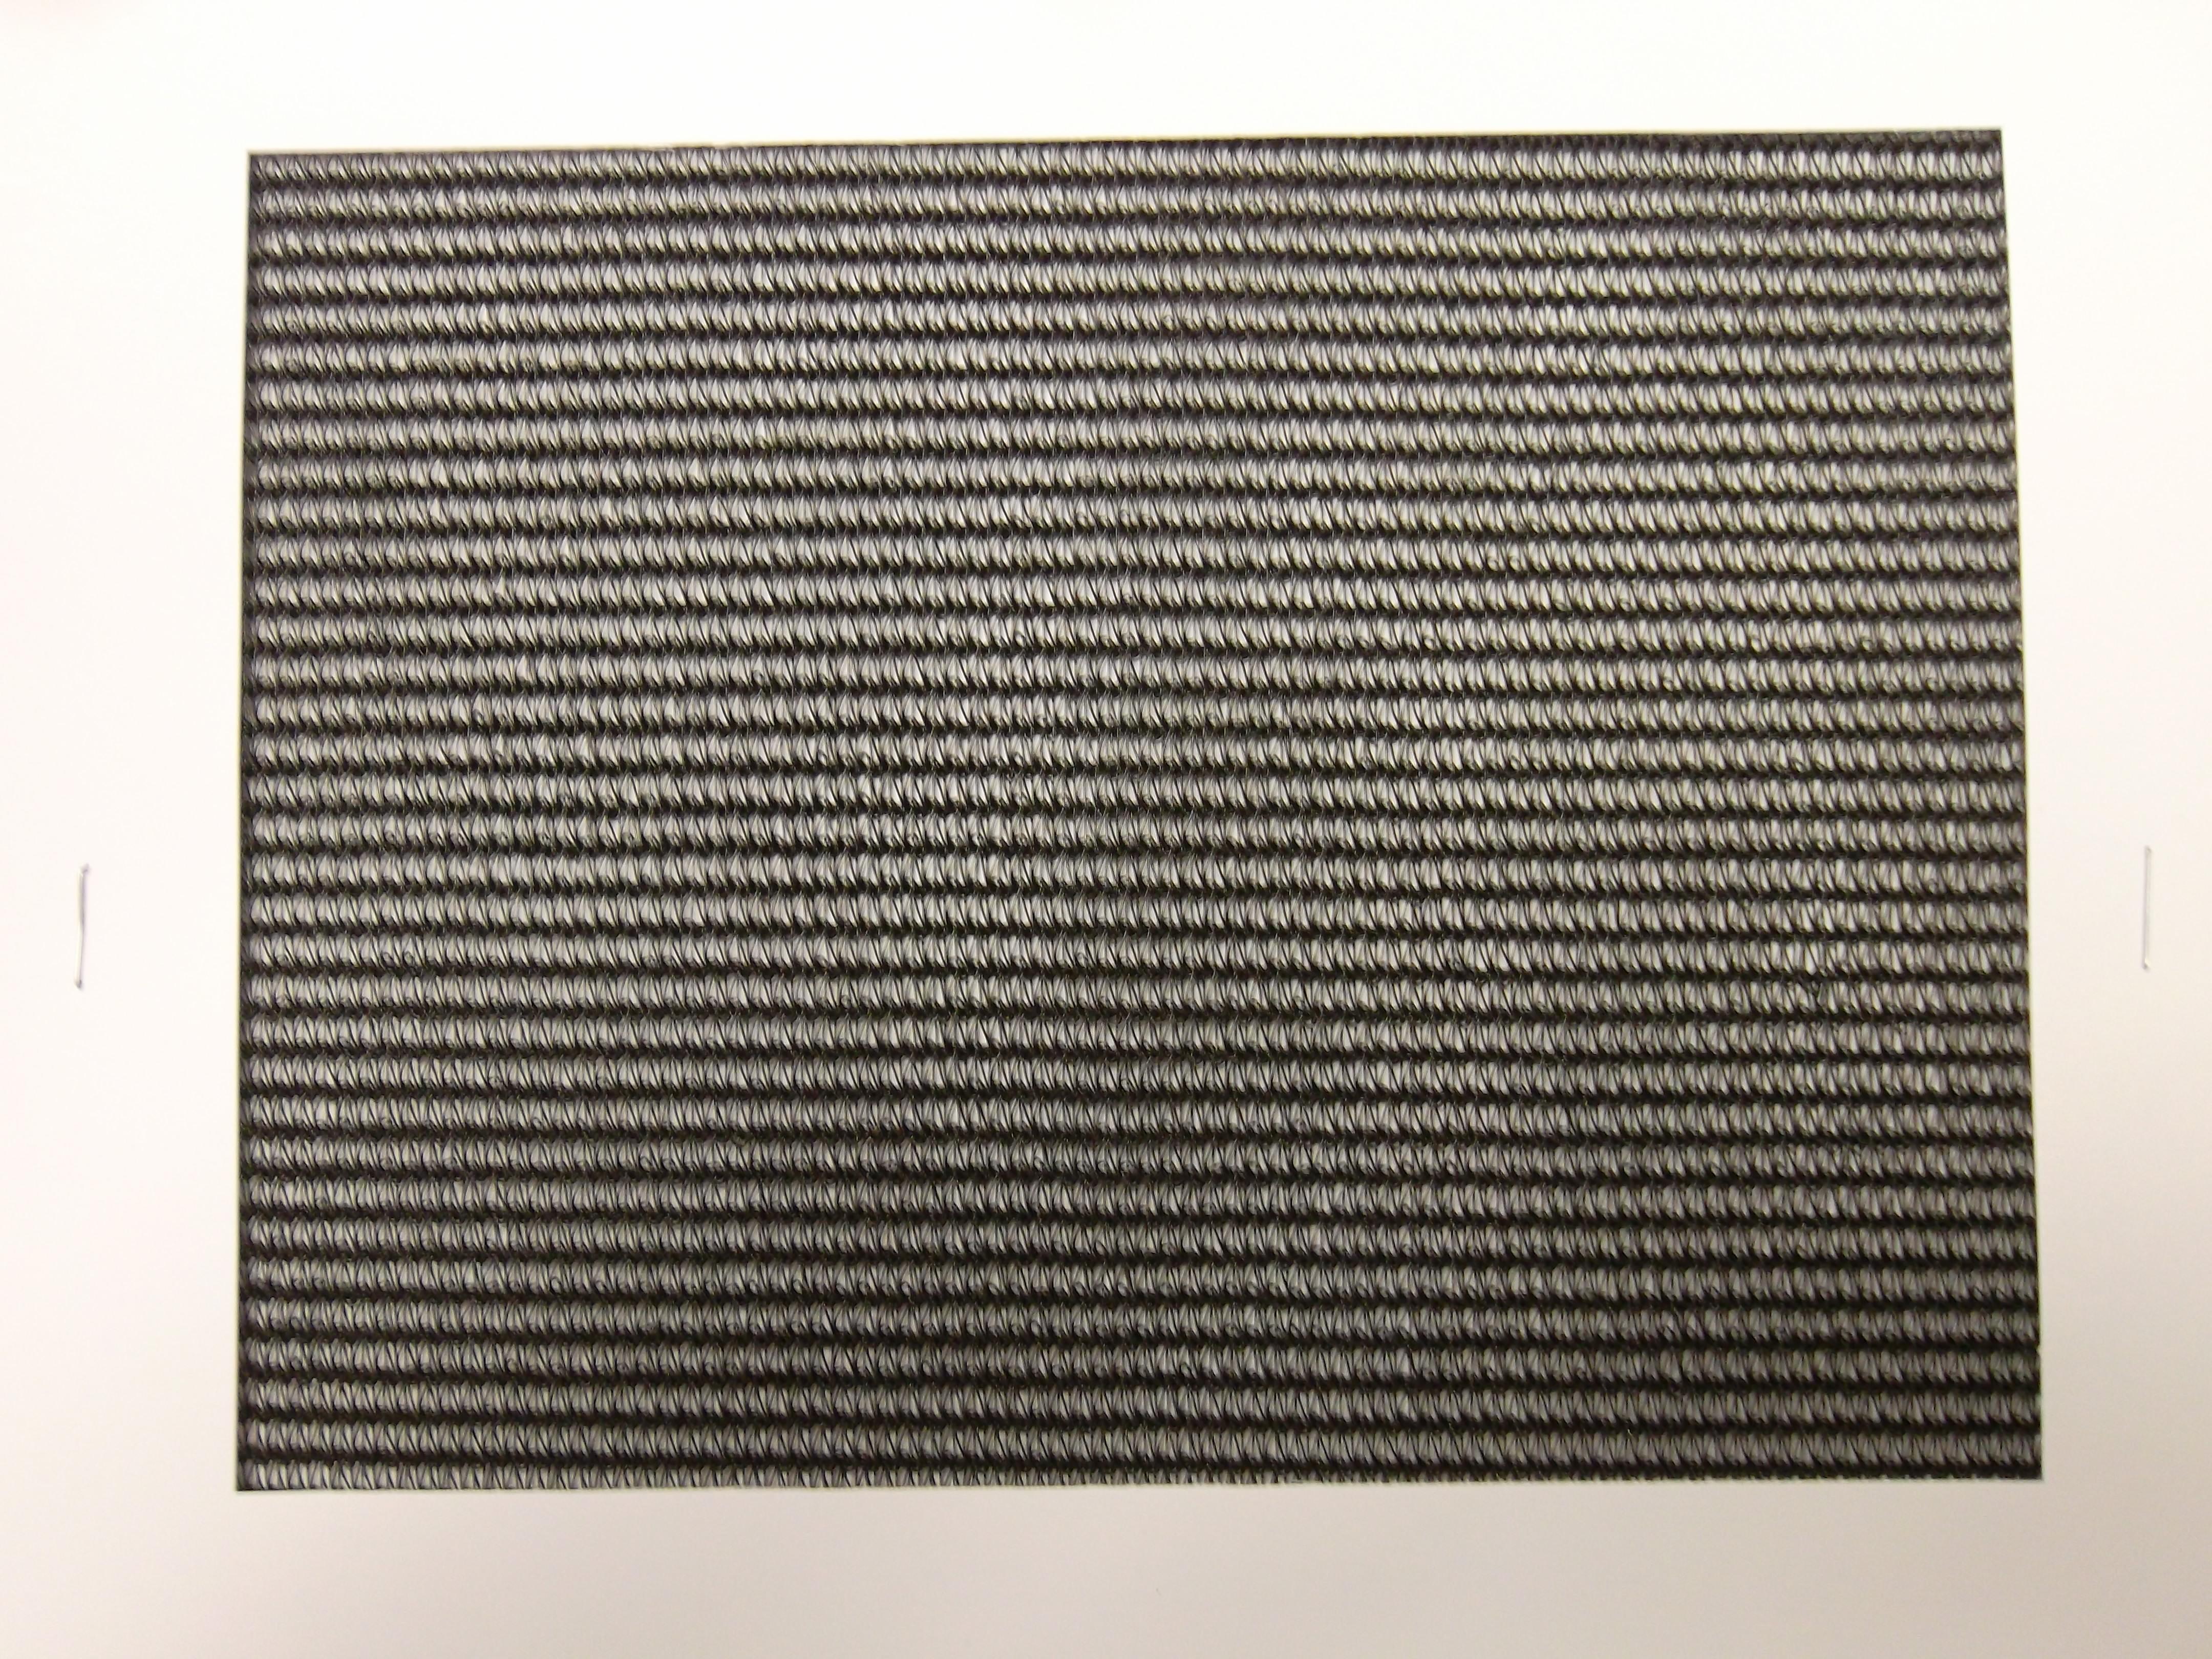 Airsoft Netting 12' x 300' w/ Grommets & Edges